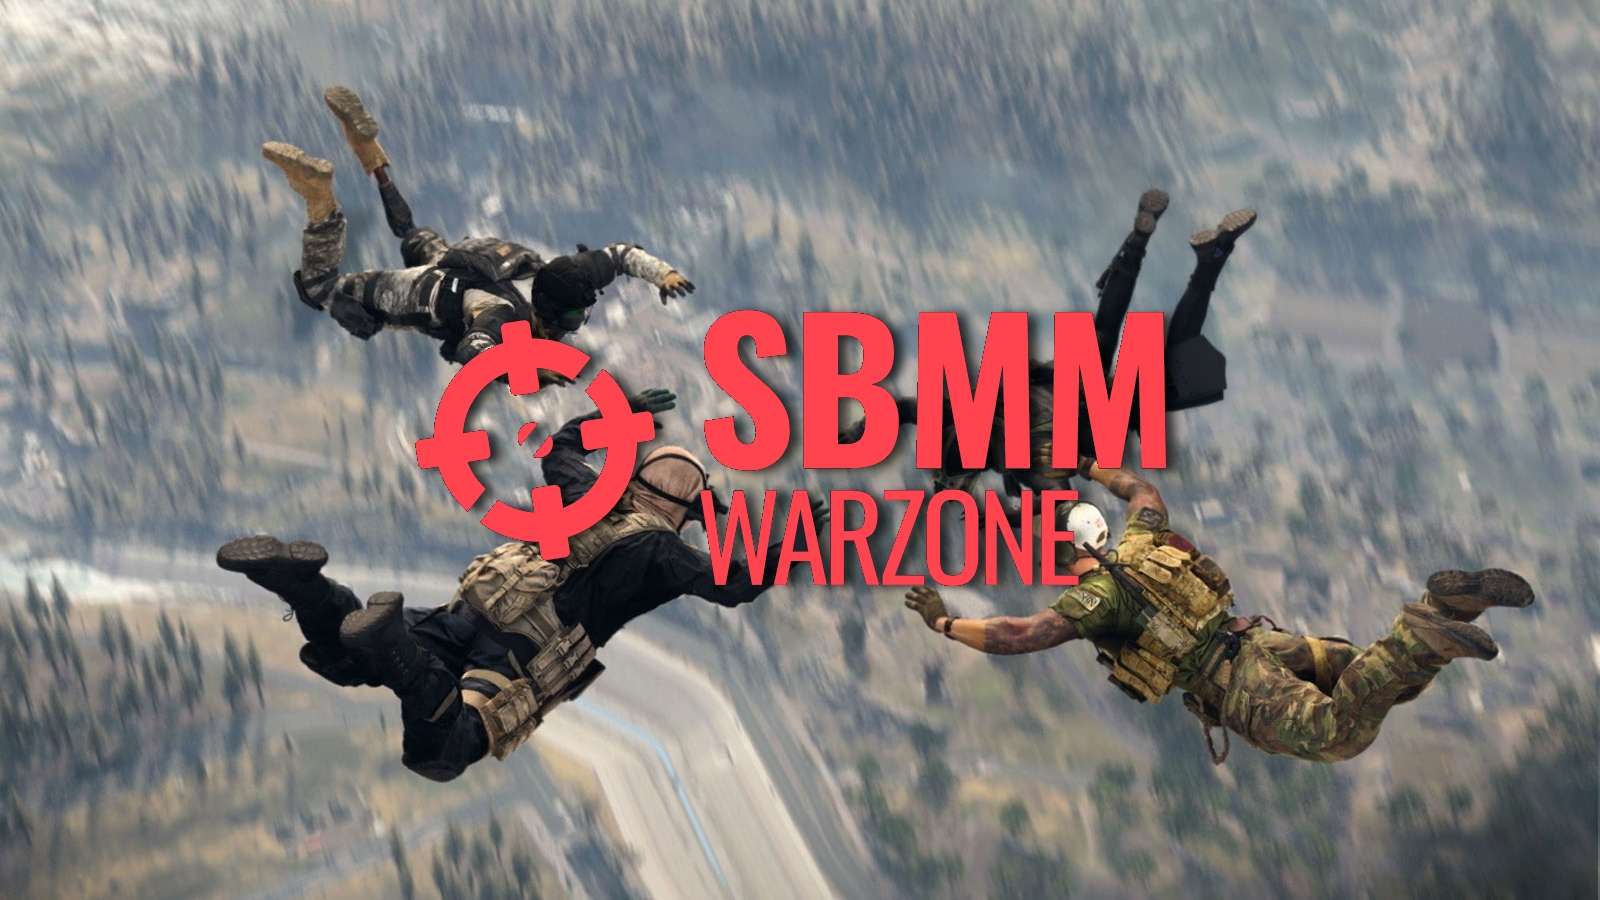 SBMM Warzone with players in-game